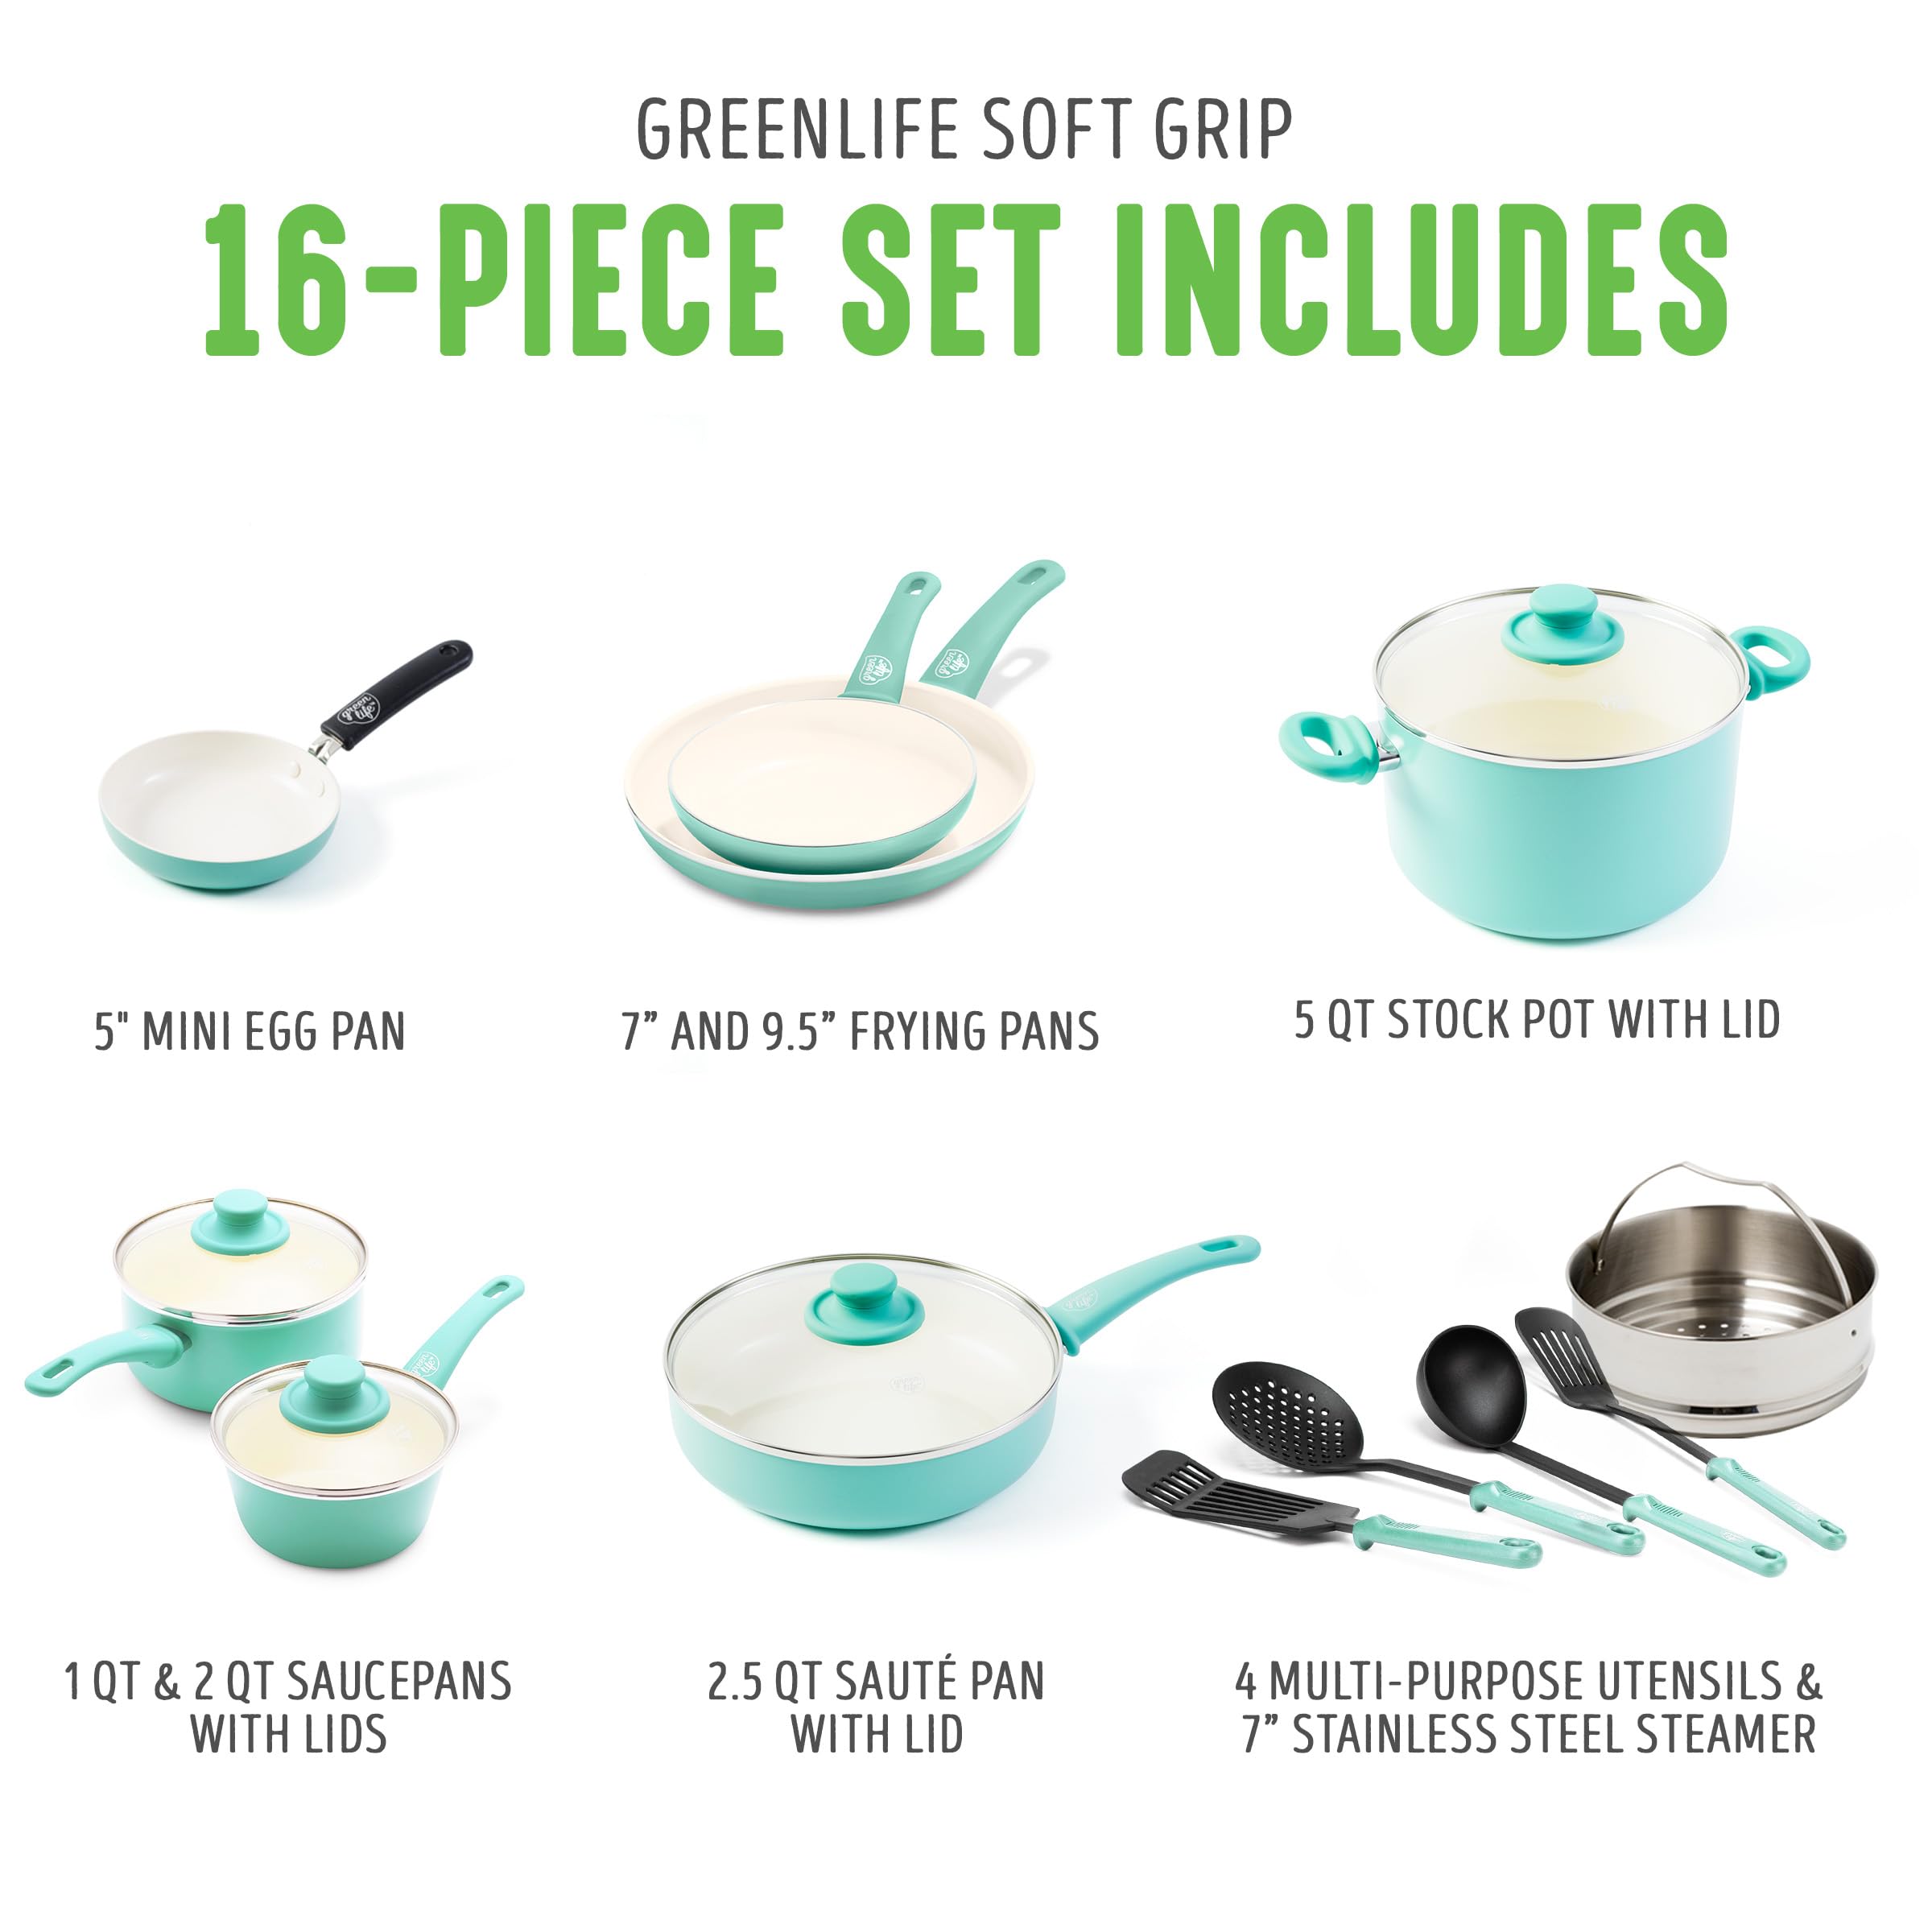 GreenLife Soft Grip Healthy Ceramic Nonstick 16 Piece Kitchen Cookware Pots and Frying Sauce Pans Set, PFAS-Free, Dishwasher Safe, Turquoise